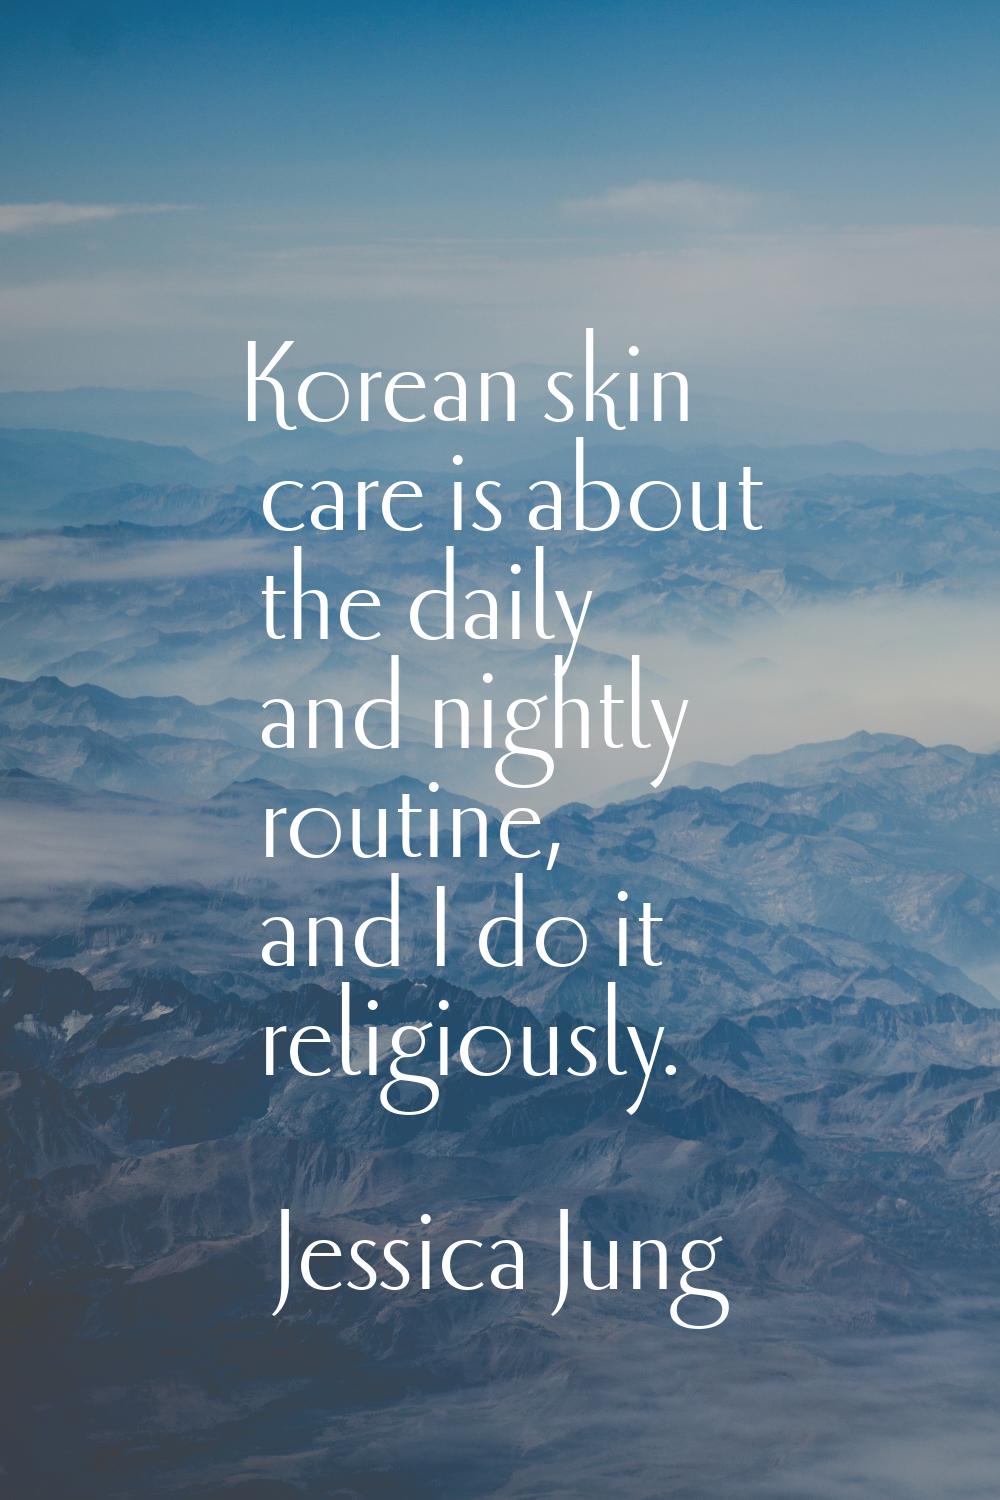 Korean skin care is about the daily and nightly routine, and I do it religiously.